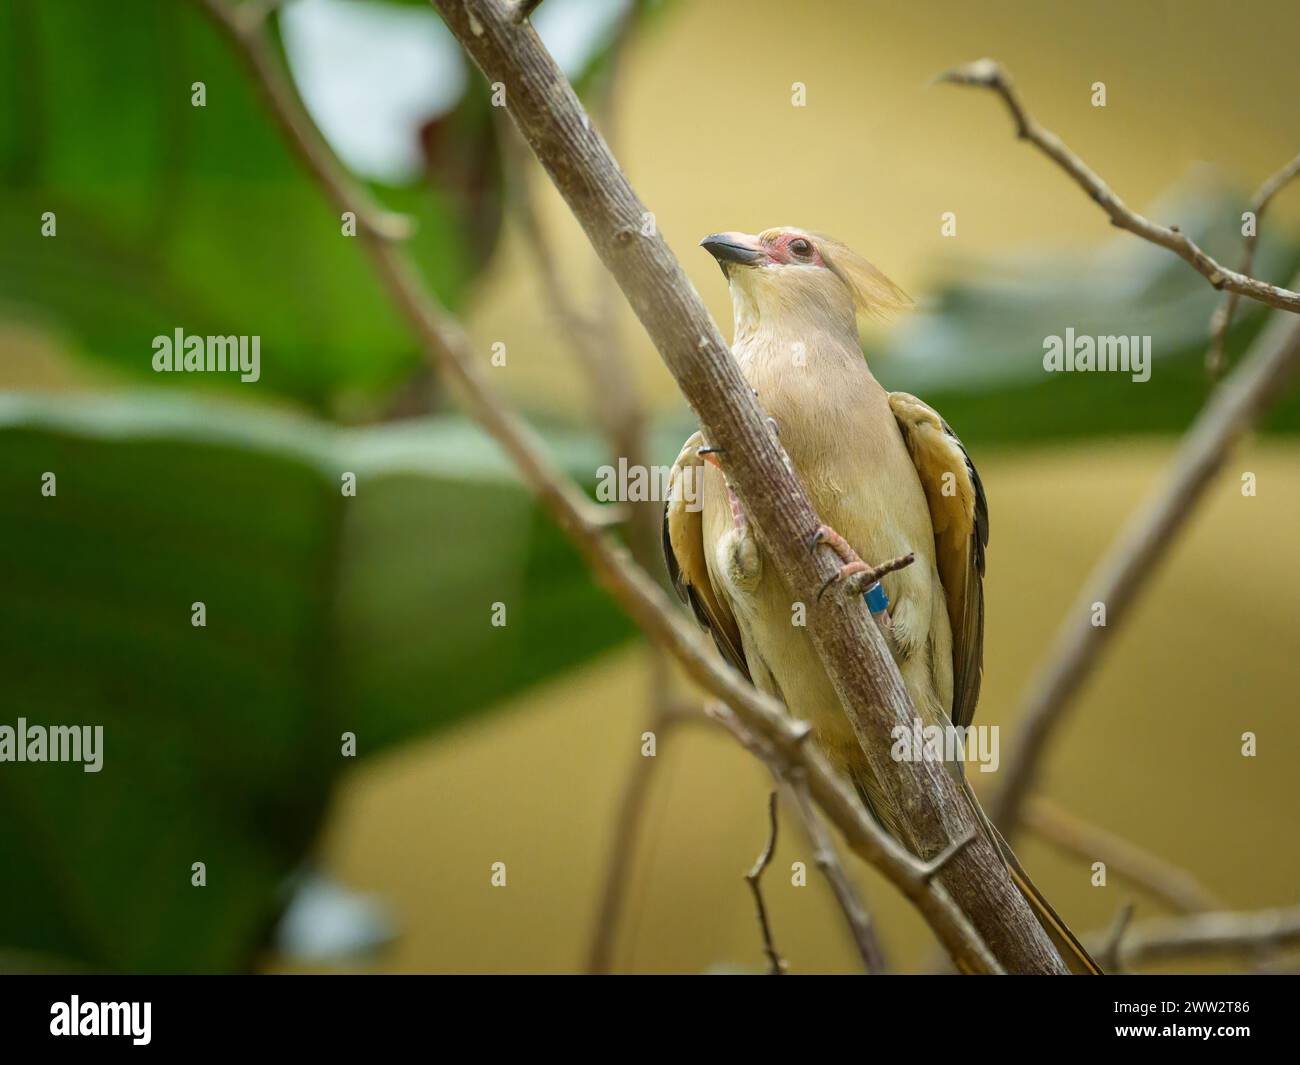 A blue naped Mousebird sitting on a branch in a zoo Stock Photo